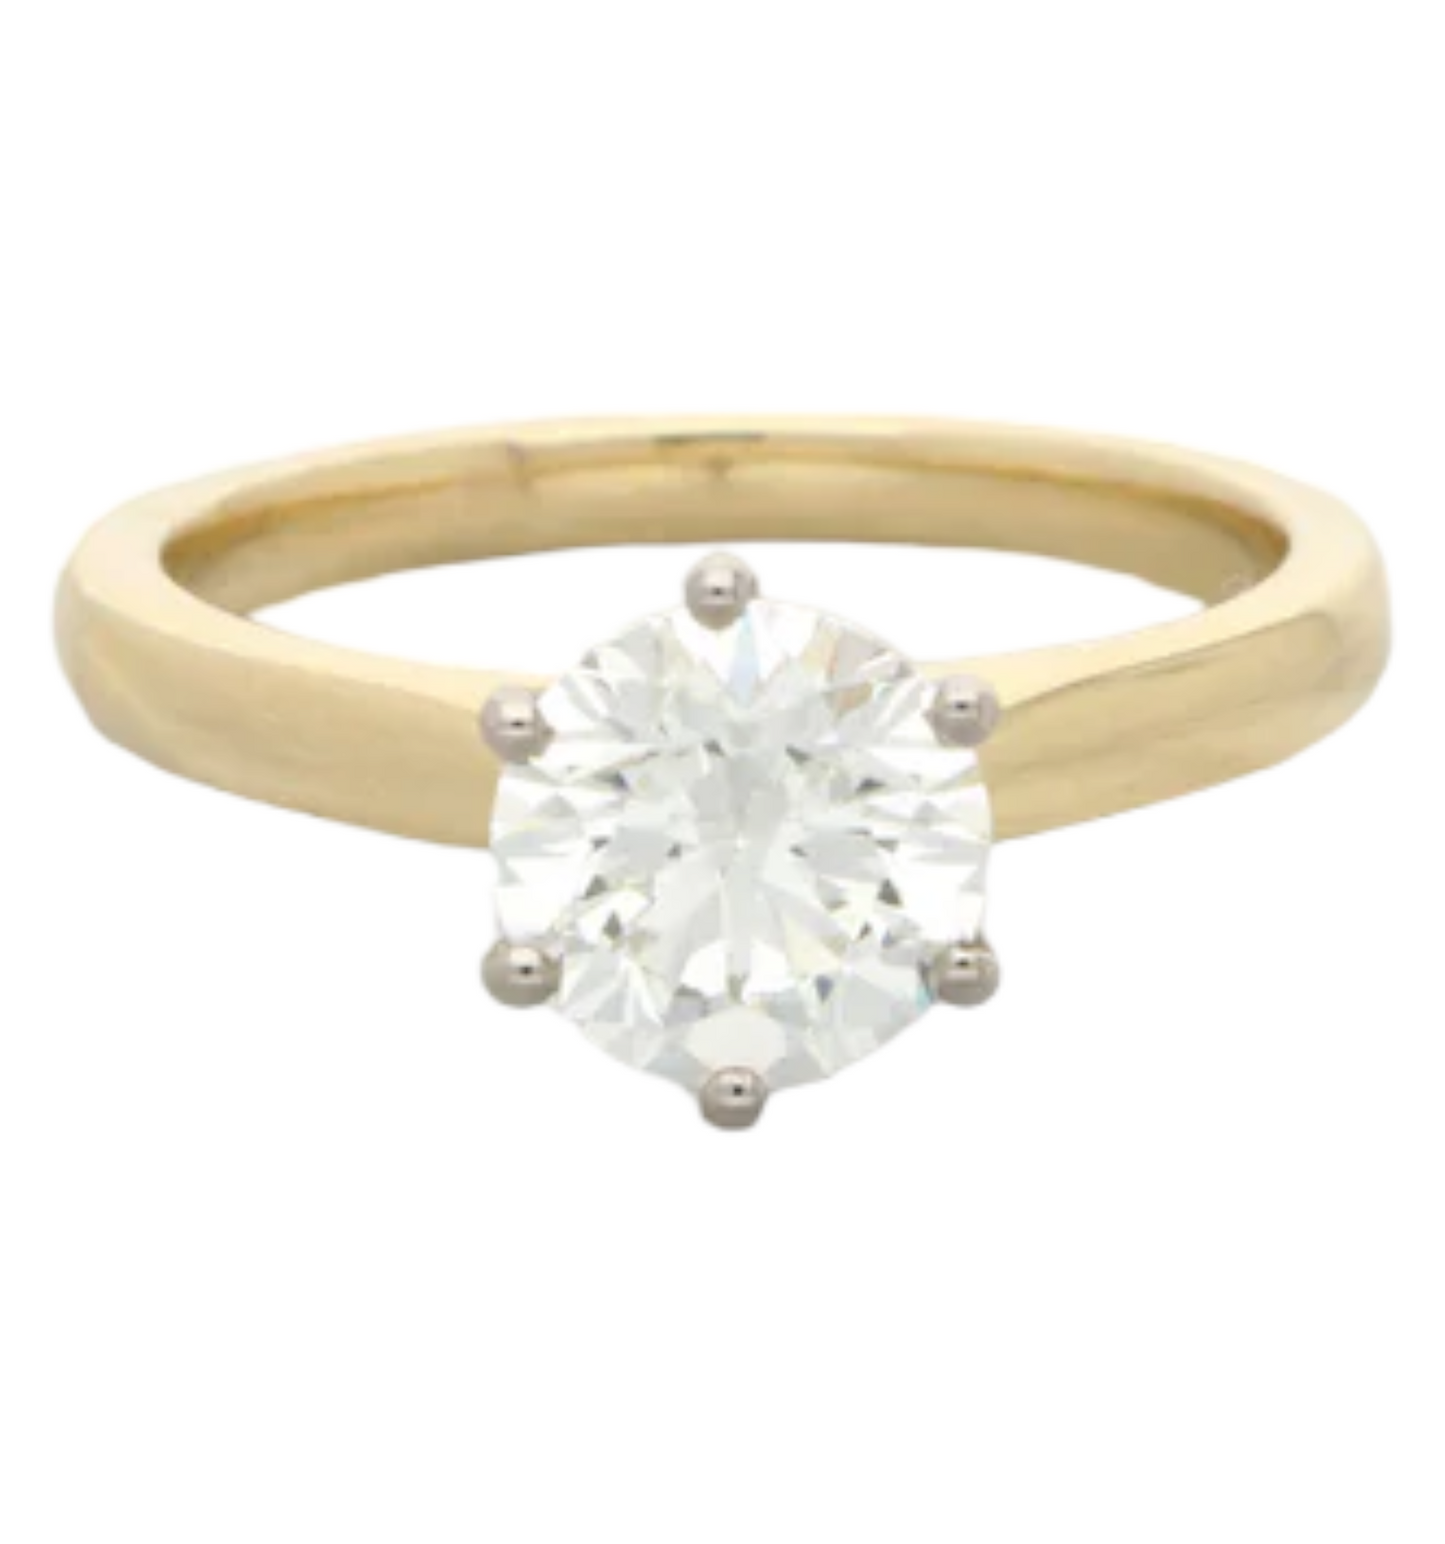 18ct 1.72ct diamond solitaire engagement ring